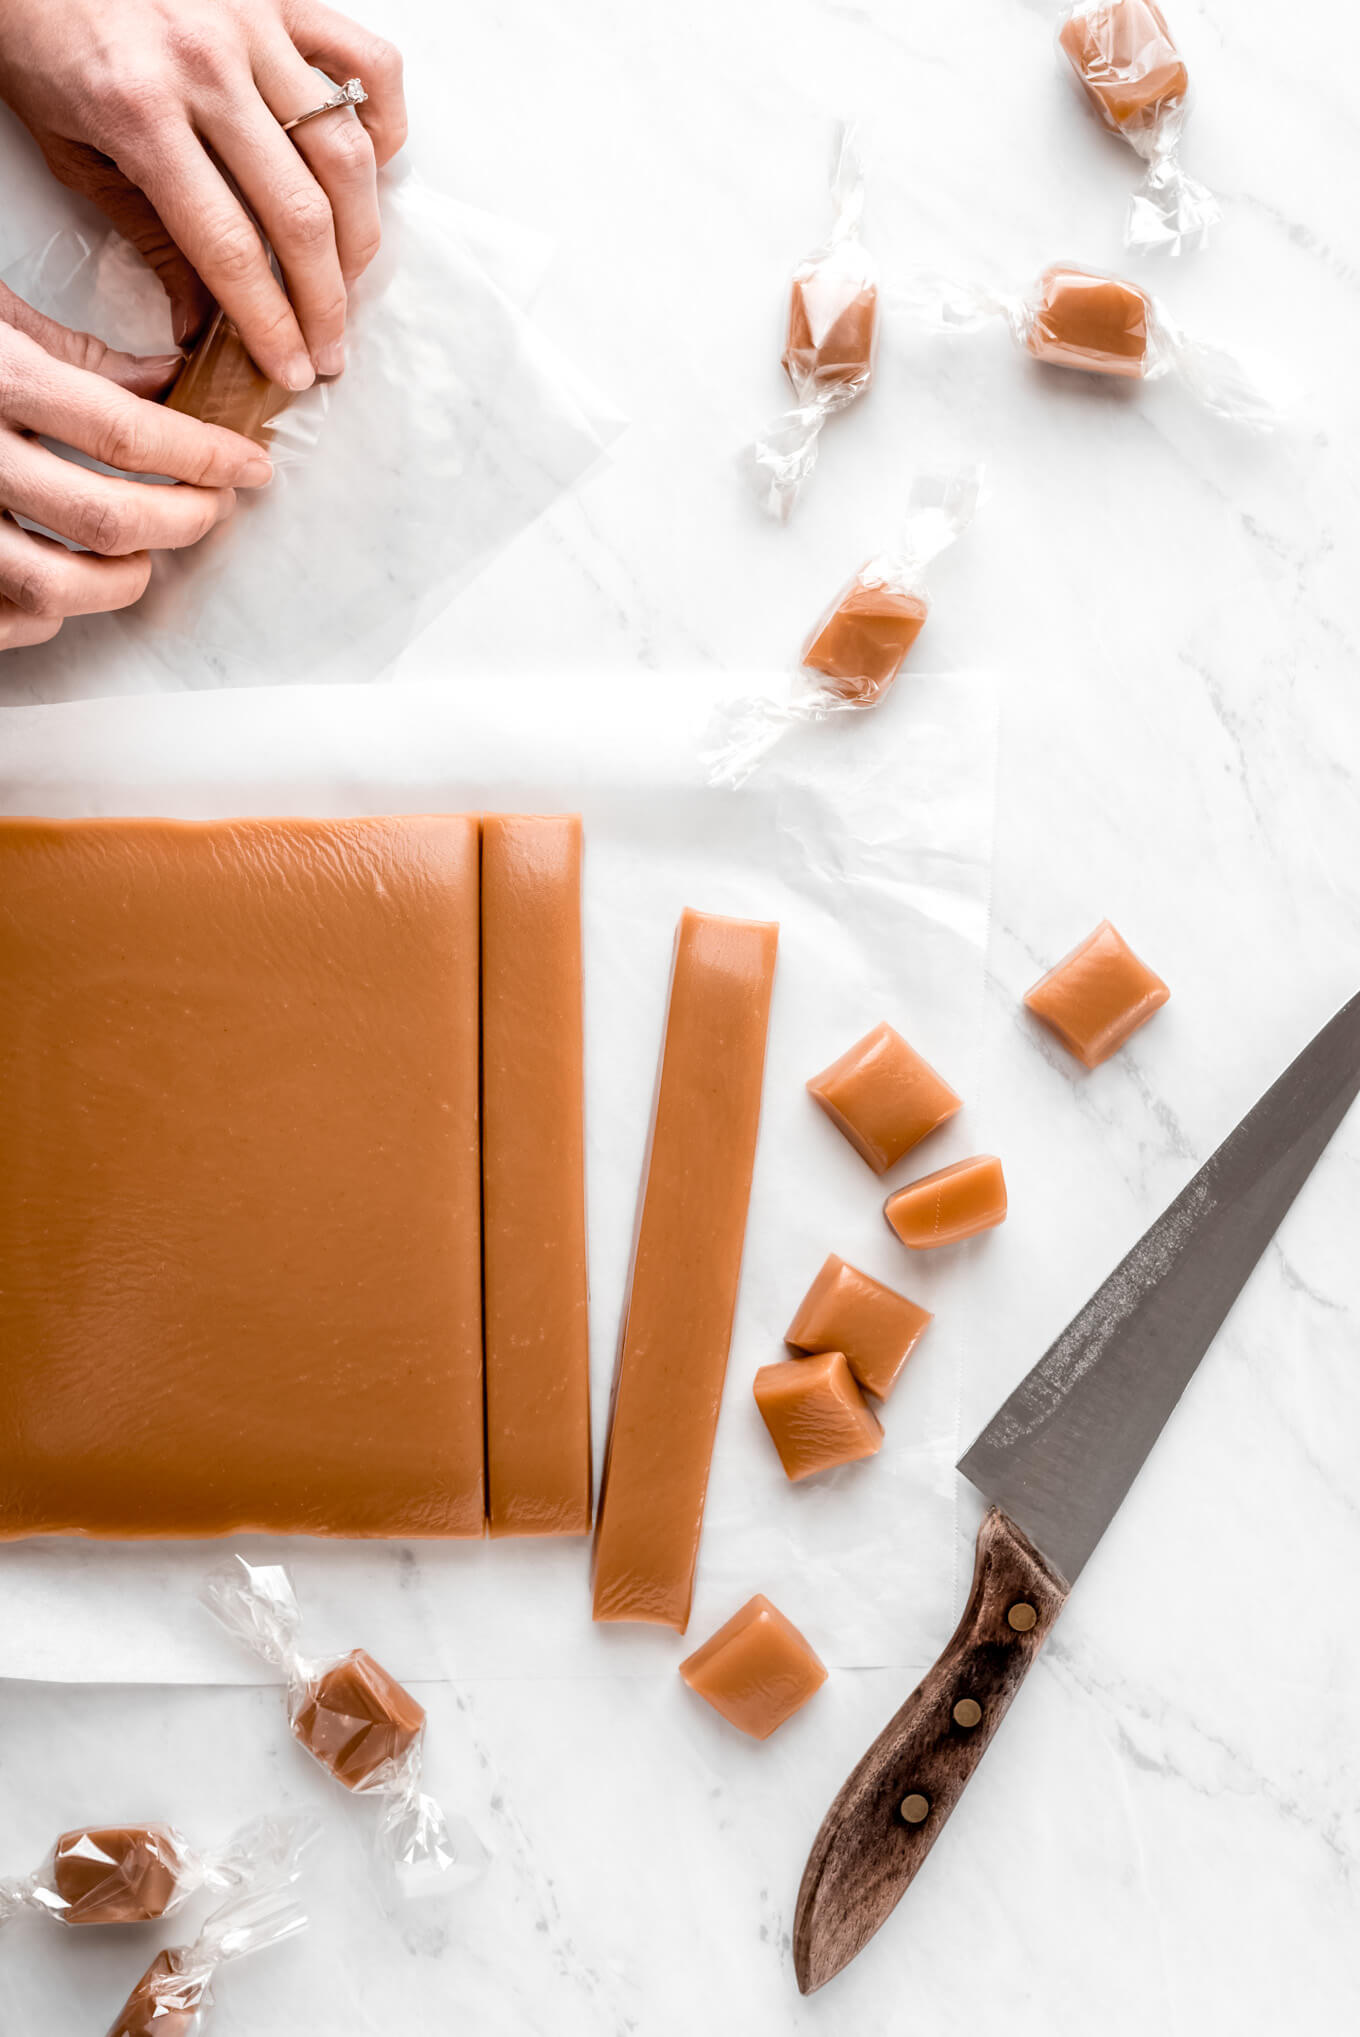 A large slab of caramel cut up into long strips and squares and some wrapped in cellophane.